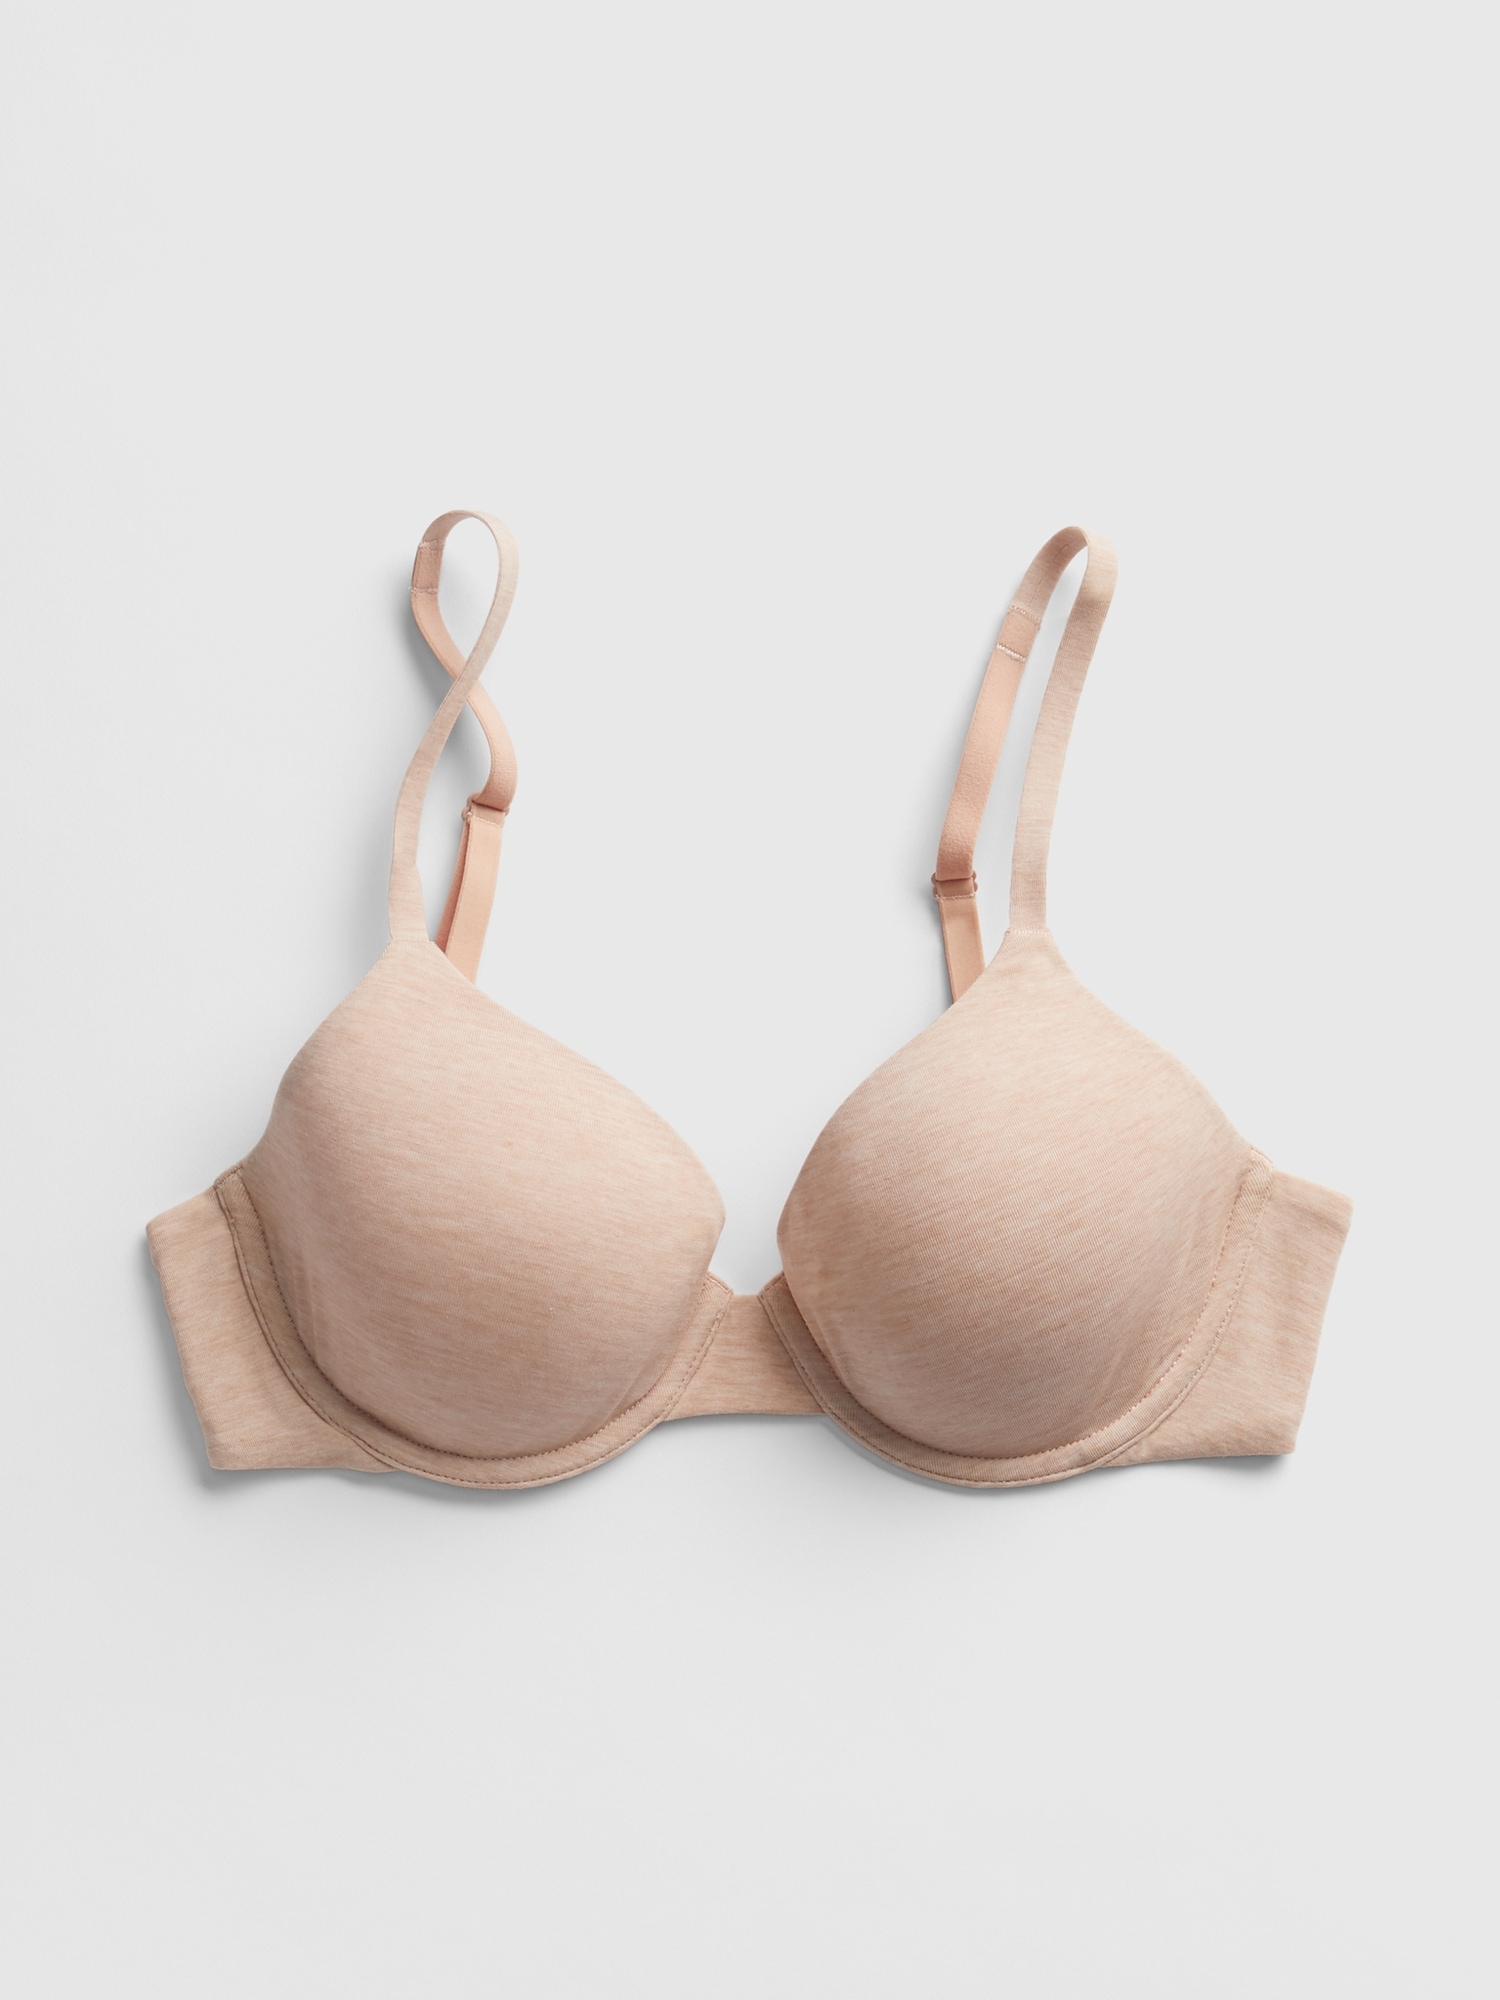 Buy Bra 38c With Wire And Foam Buy 1 Take 1 online